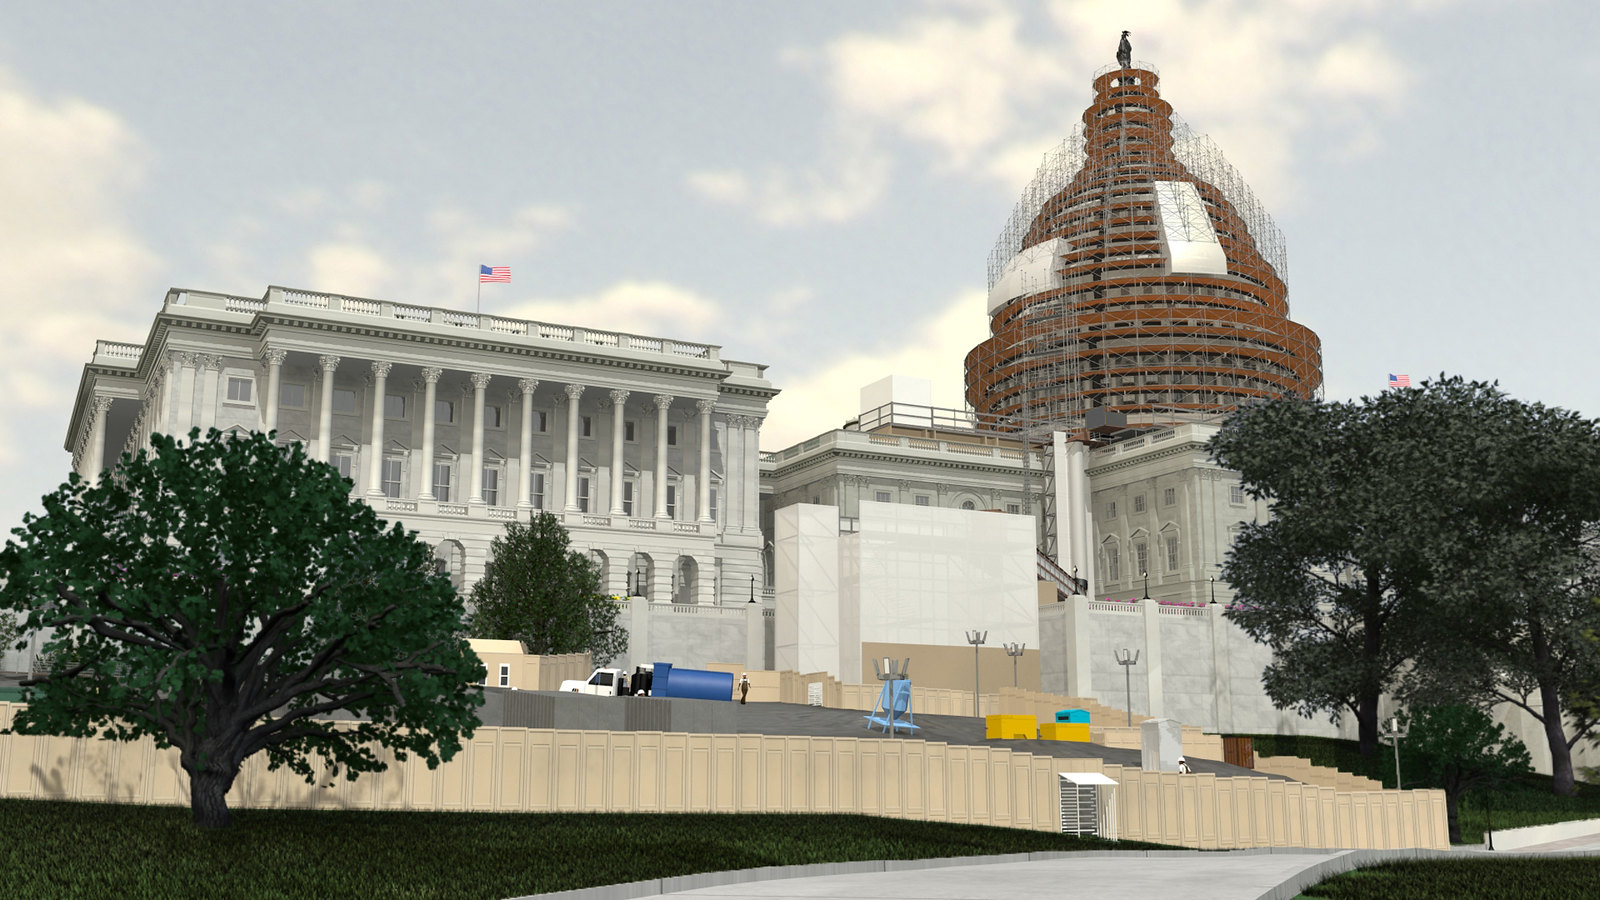 Rendering of scaffolding on Capitol Dome